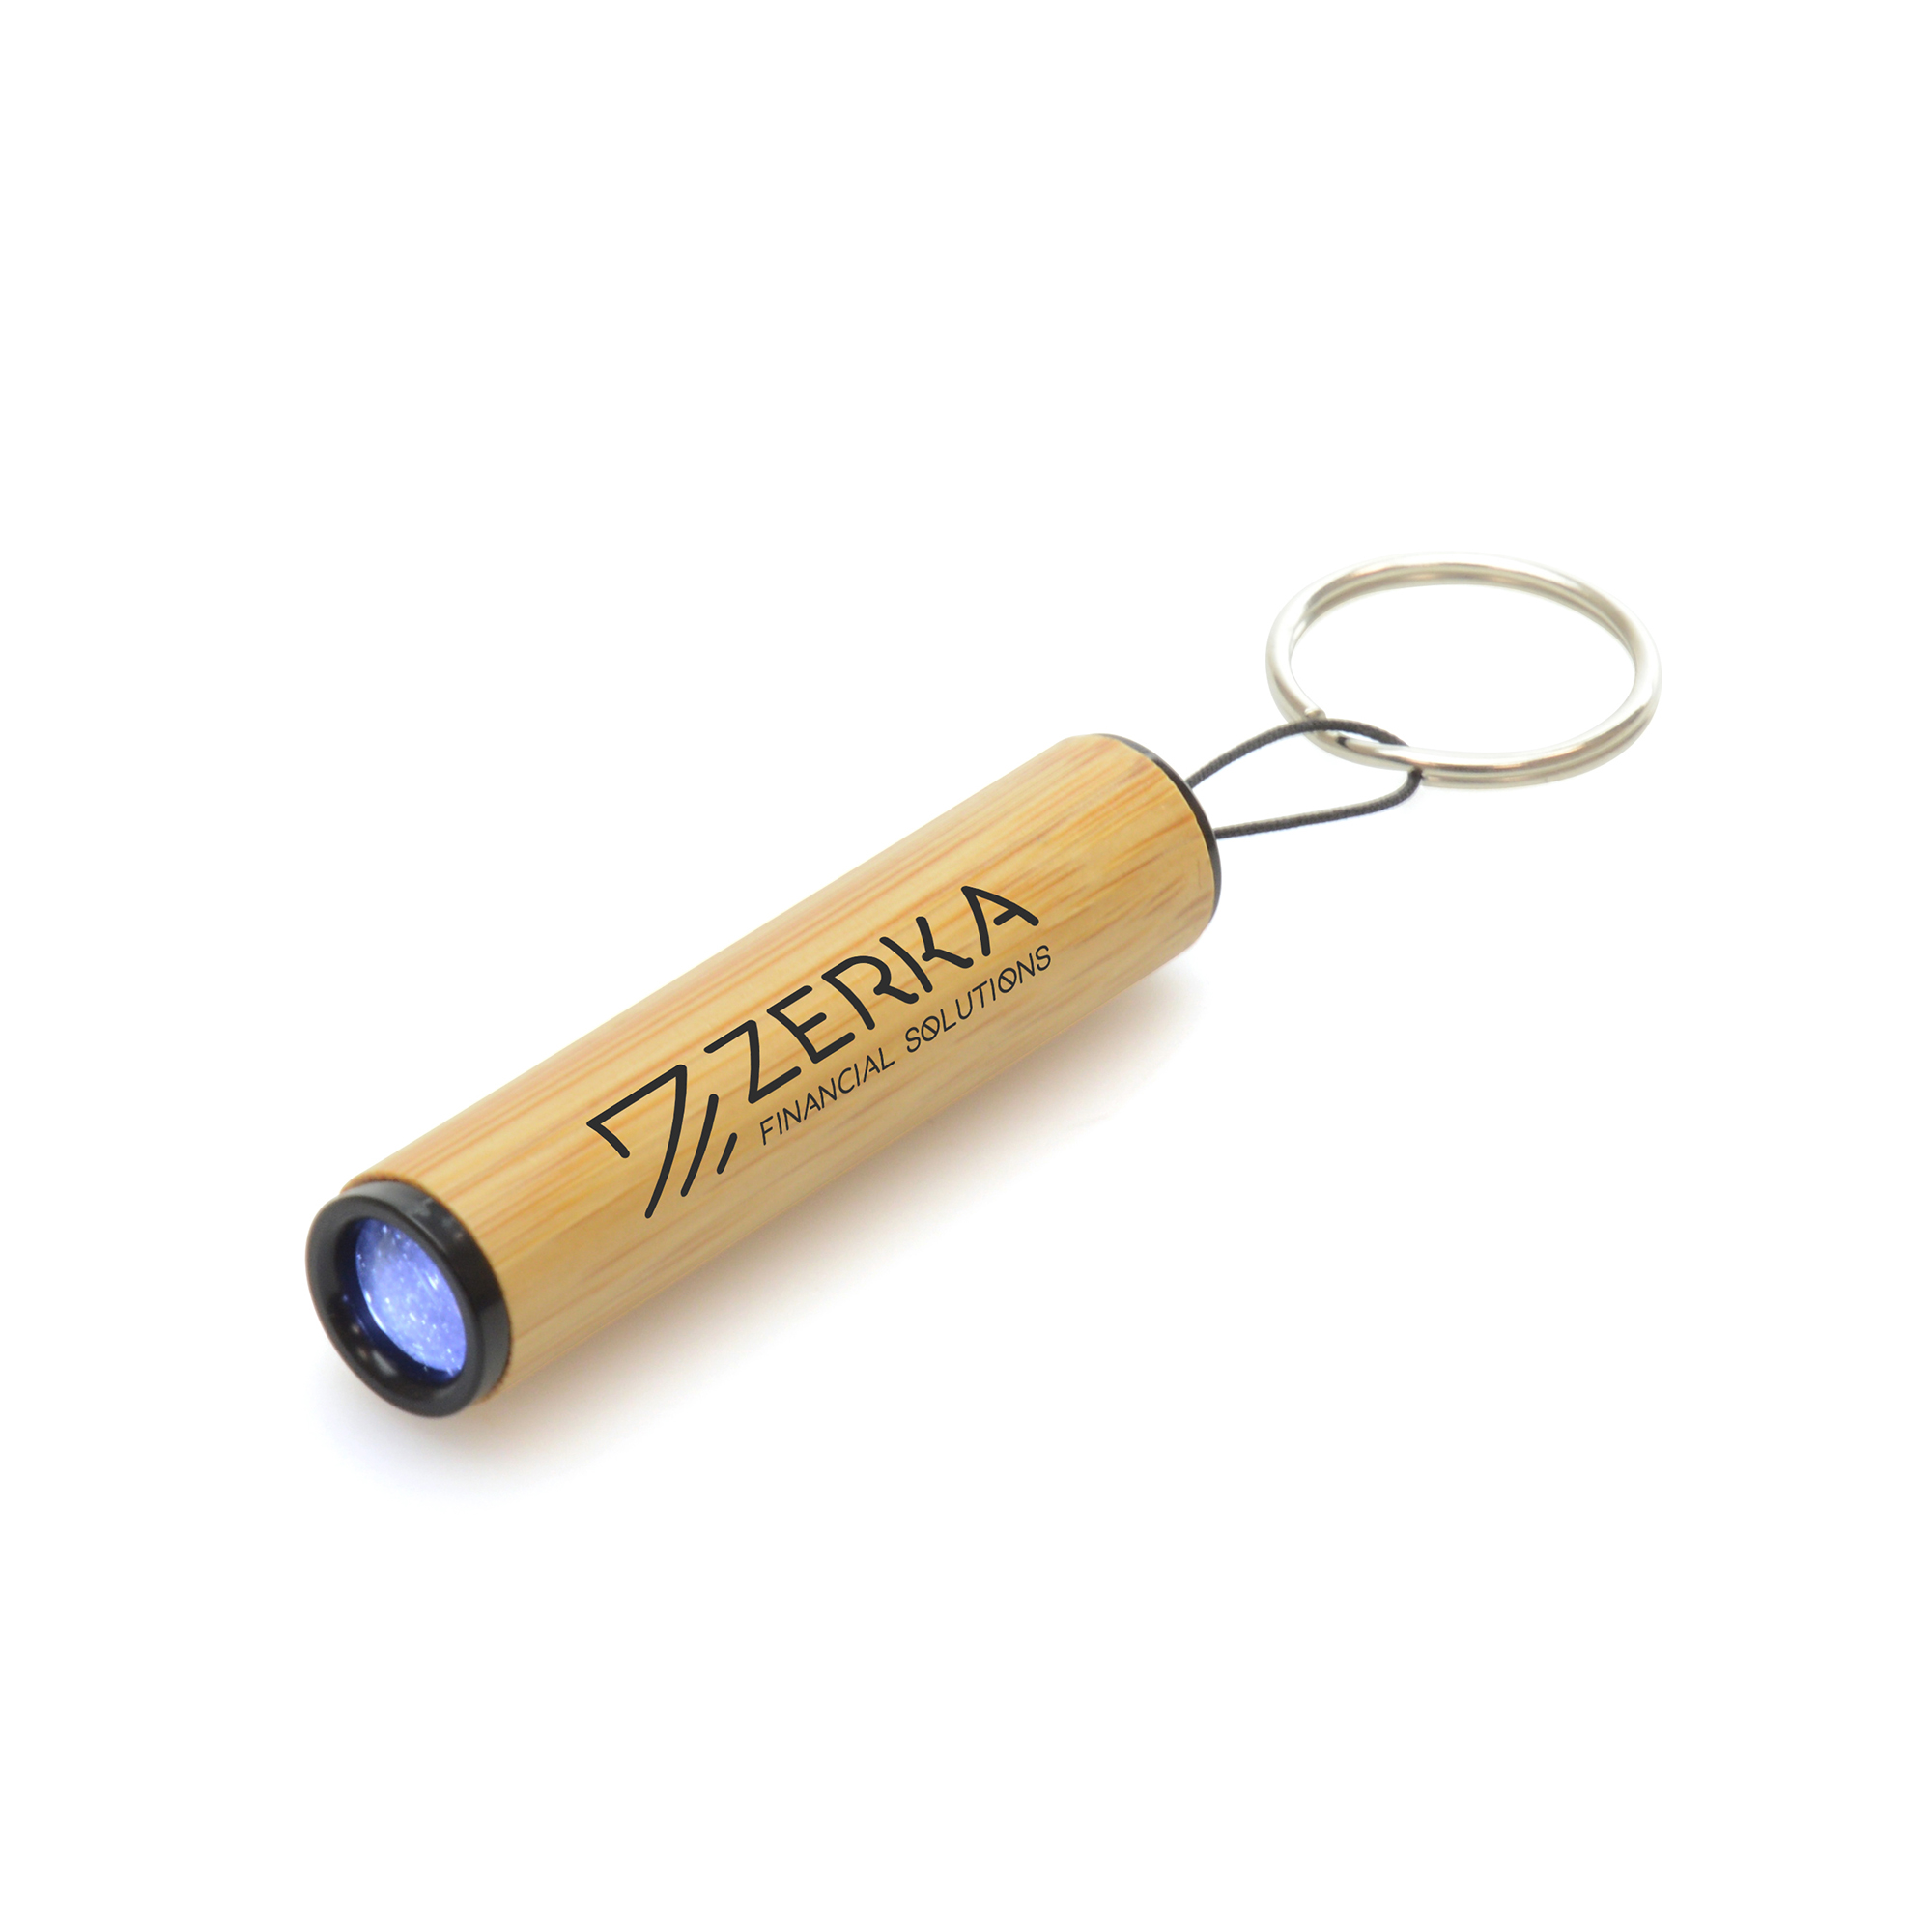 LED torch made from natural bamboo with an ABS plastic head and inner and split ring cord which is pulled to activate the light. Colour can vary due to it being a natural product.